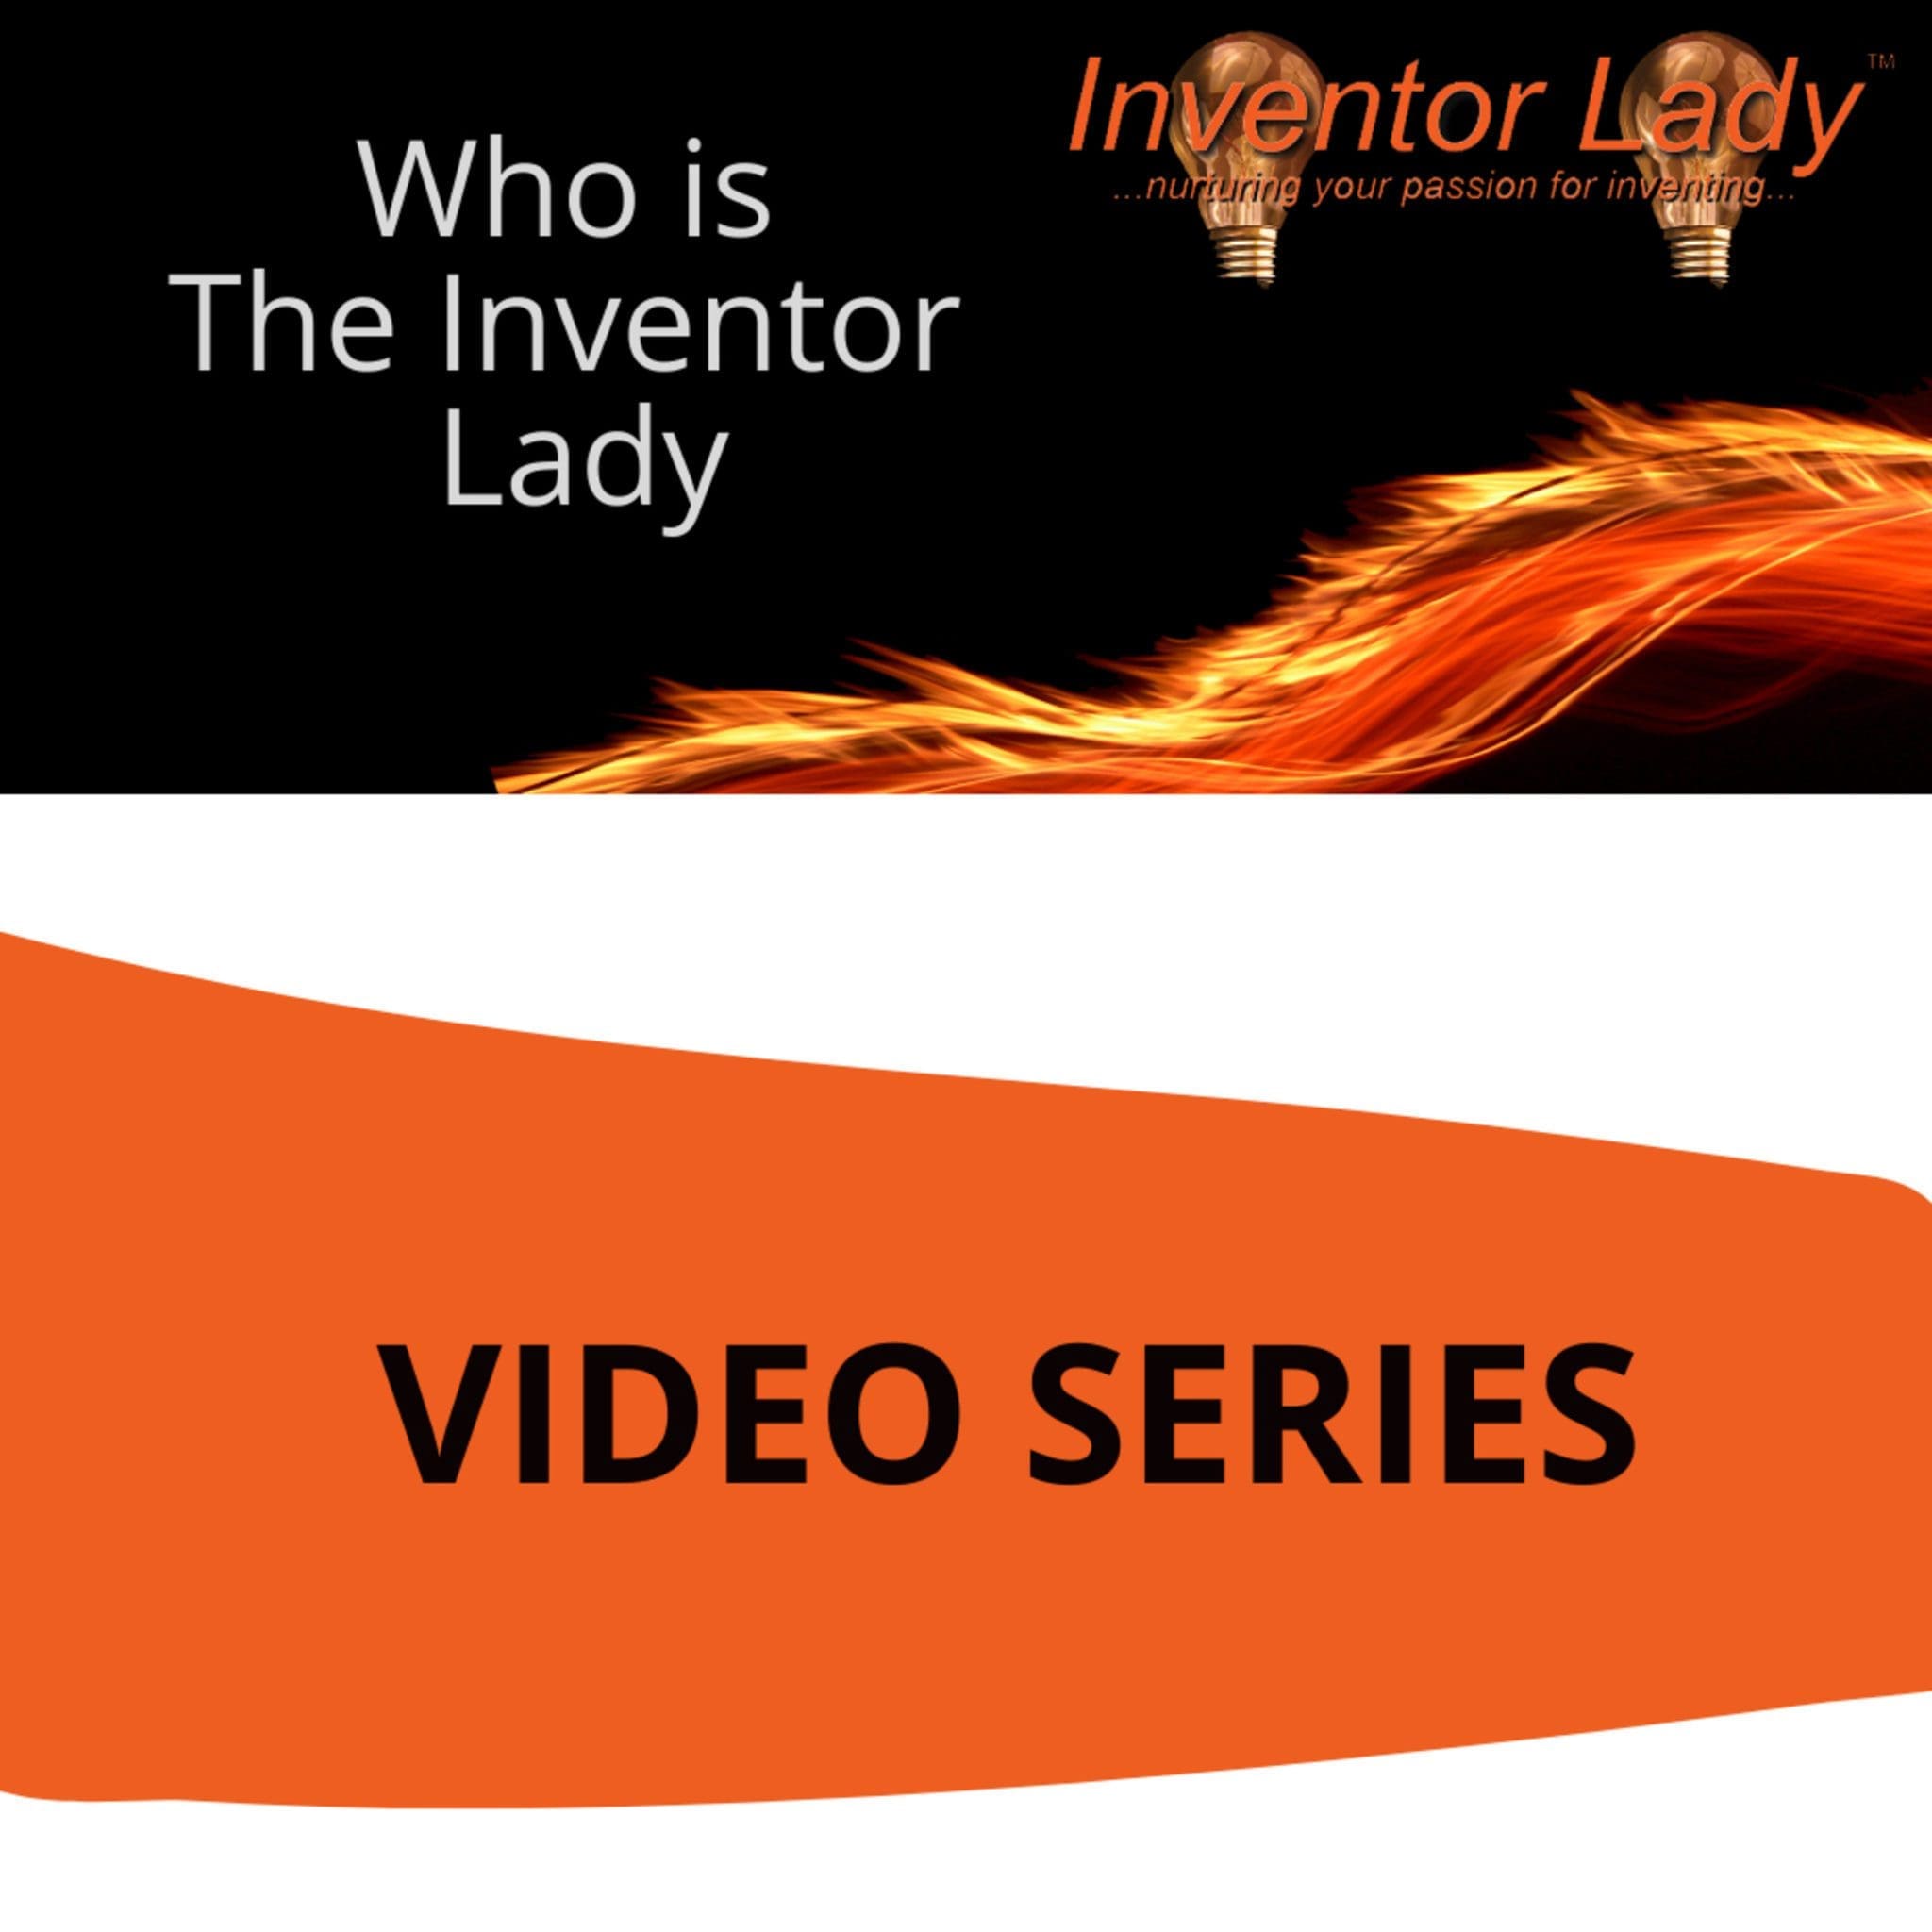 Who is the Inventor Lady